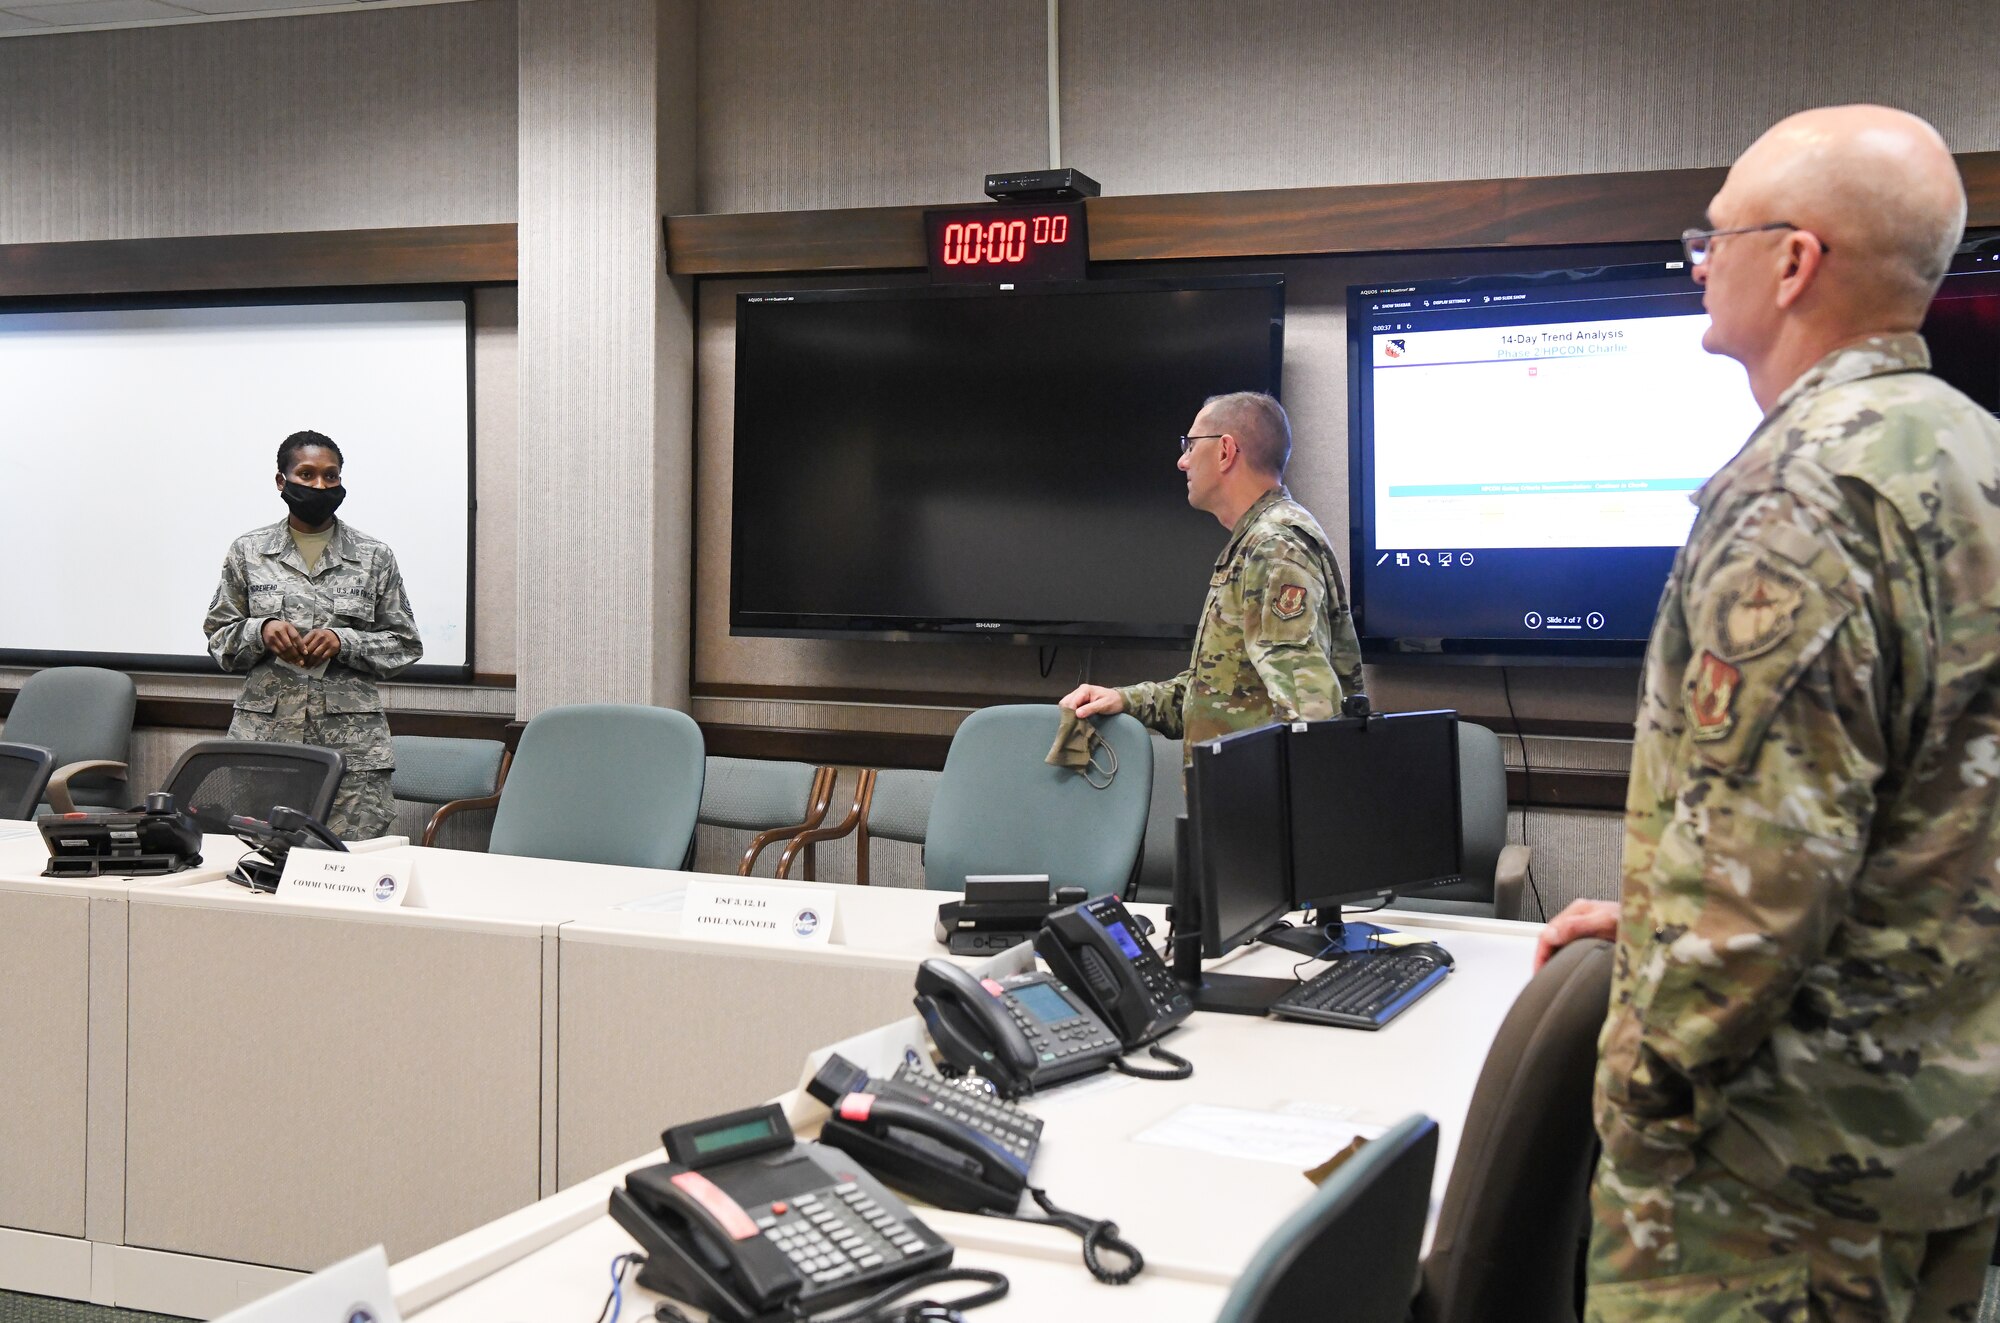 Master Sgt. Lashonda Morehead, left, flight chief of medical operations at Arnold Air Force Base, briefs Gen. Arnold W. Bunch Jr., right, commander, Air Force Materiel Command, and Chief Master Sgt. Stanley Cadell, command chief, Air Force Materiel Command, about the COVID-19 response at Arnold AFB, Tenn., headquarters of Arnold Engineering Development Complex, July 8, 2020. (U.S. Air Force photo by Jill Pickett)